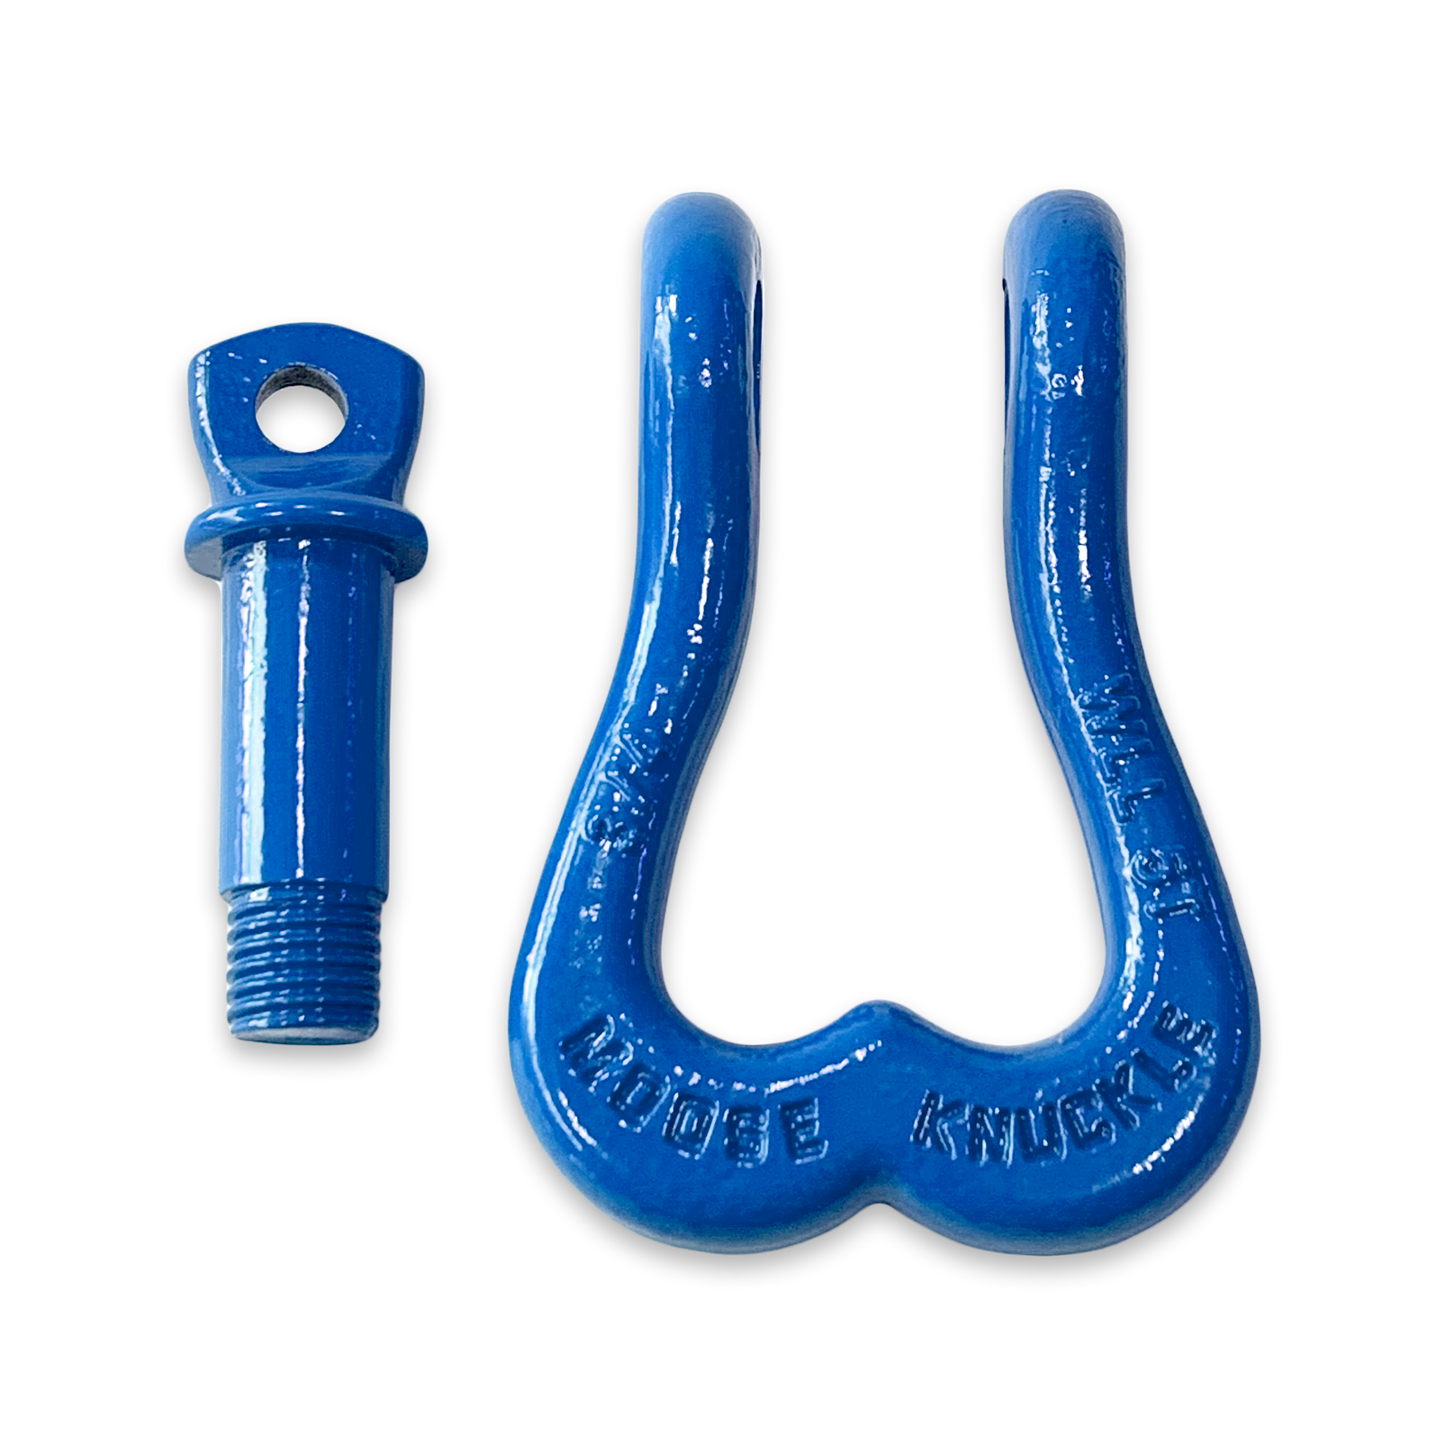 Moose Knuckle XL Blue Balls Heavy Duty Extra Strong Patent Pending 3/4" Shackle for Off-Road Vehicle Recovery to Replace Bull Balls